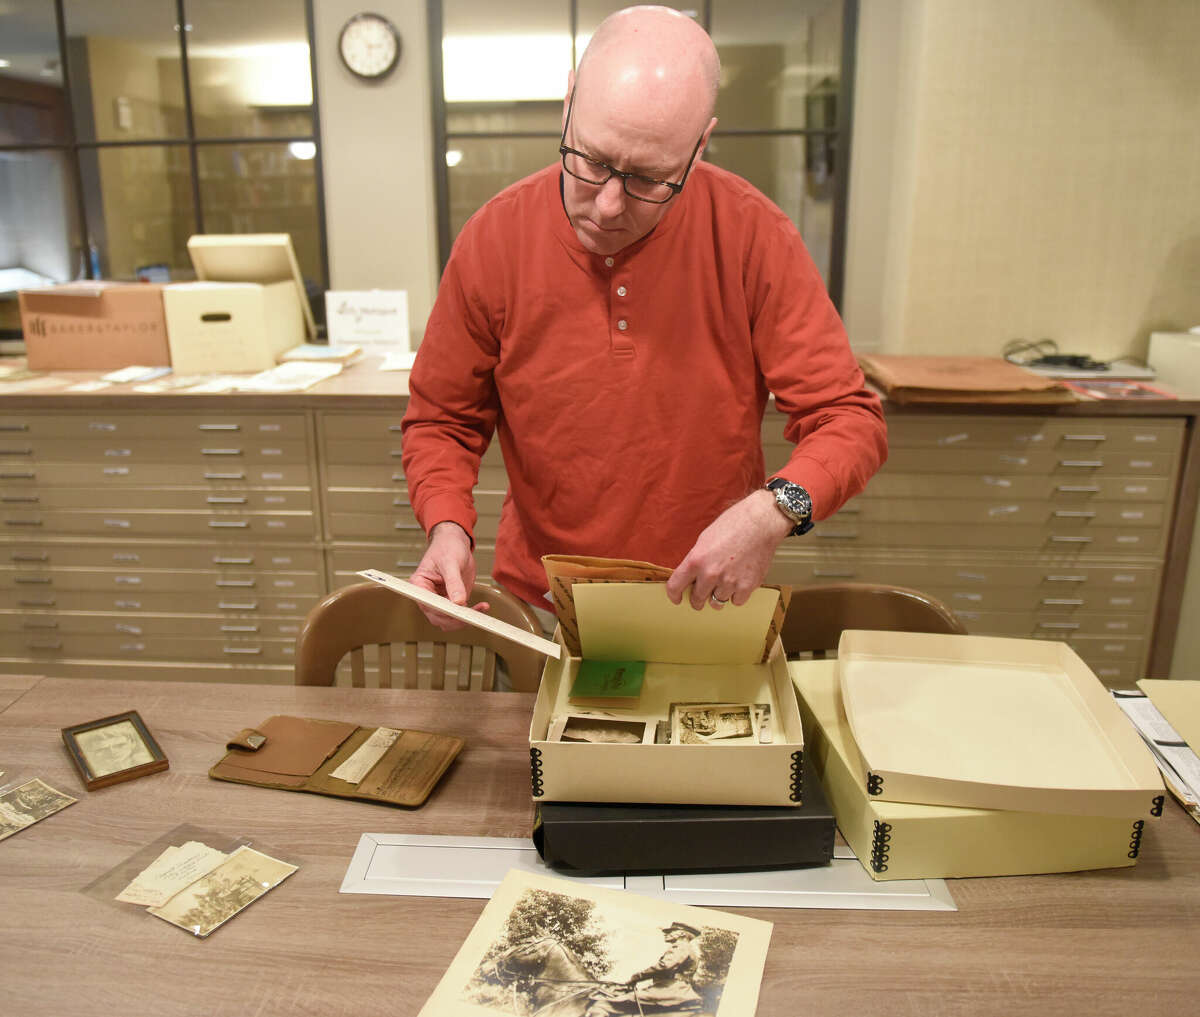 Christopher Shields, Curator of Library and Archives, shows artifacts from the life of John Henry Twachtman at the Greenwich Historical Society in Greenwich, Conn. Tuesday, Jan. 3, 2023. Original letters written by and to Twachtman, rare photographs from the Holley-MacRae papers, and other notes from primary sources will be on view during "Afternoon in the Archives: Twachtman in His Own Words," on Sunday, Jan. 8 at 2 p.m.